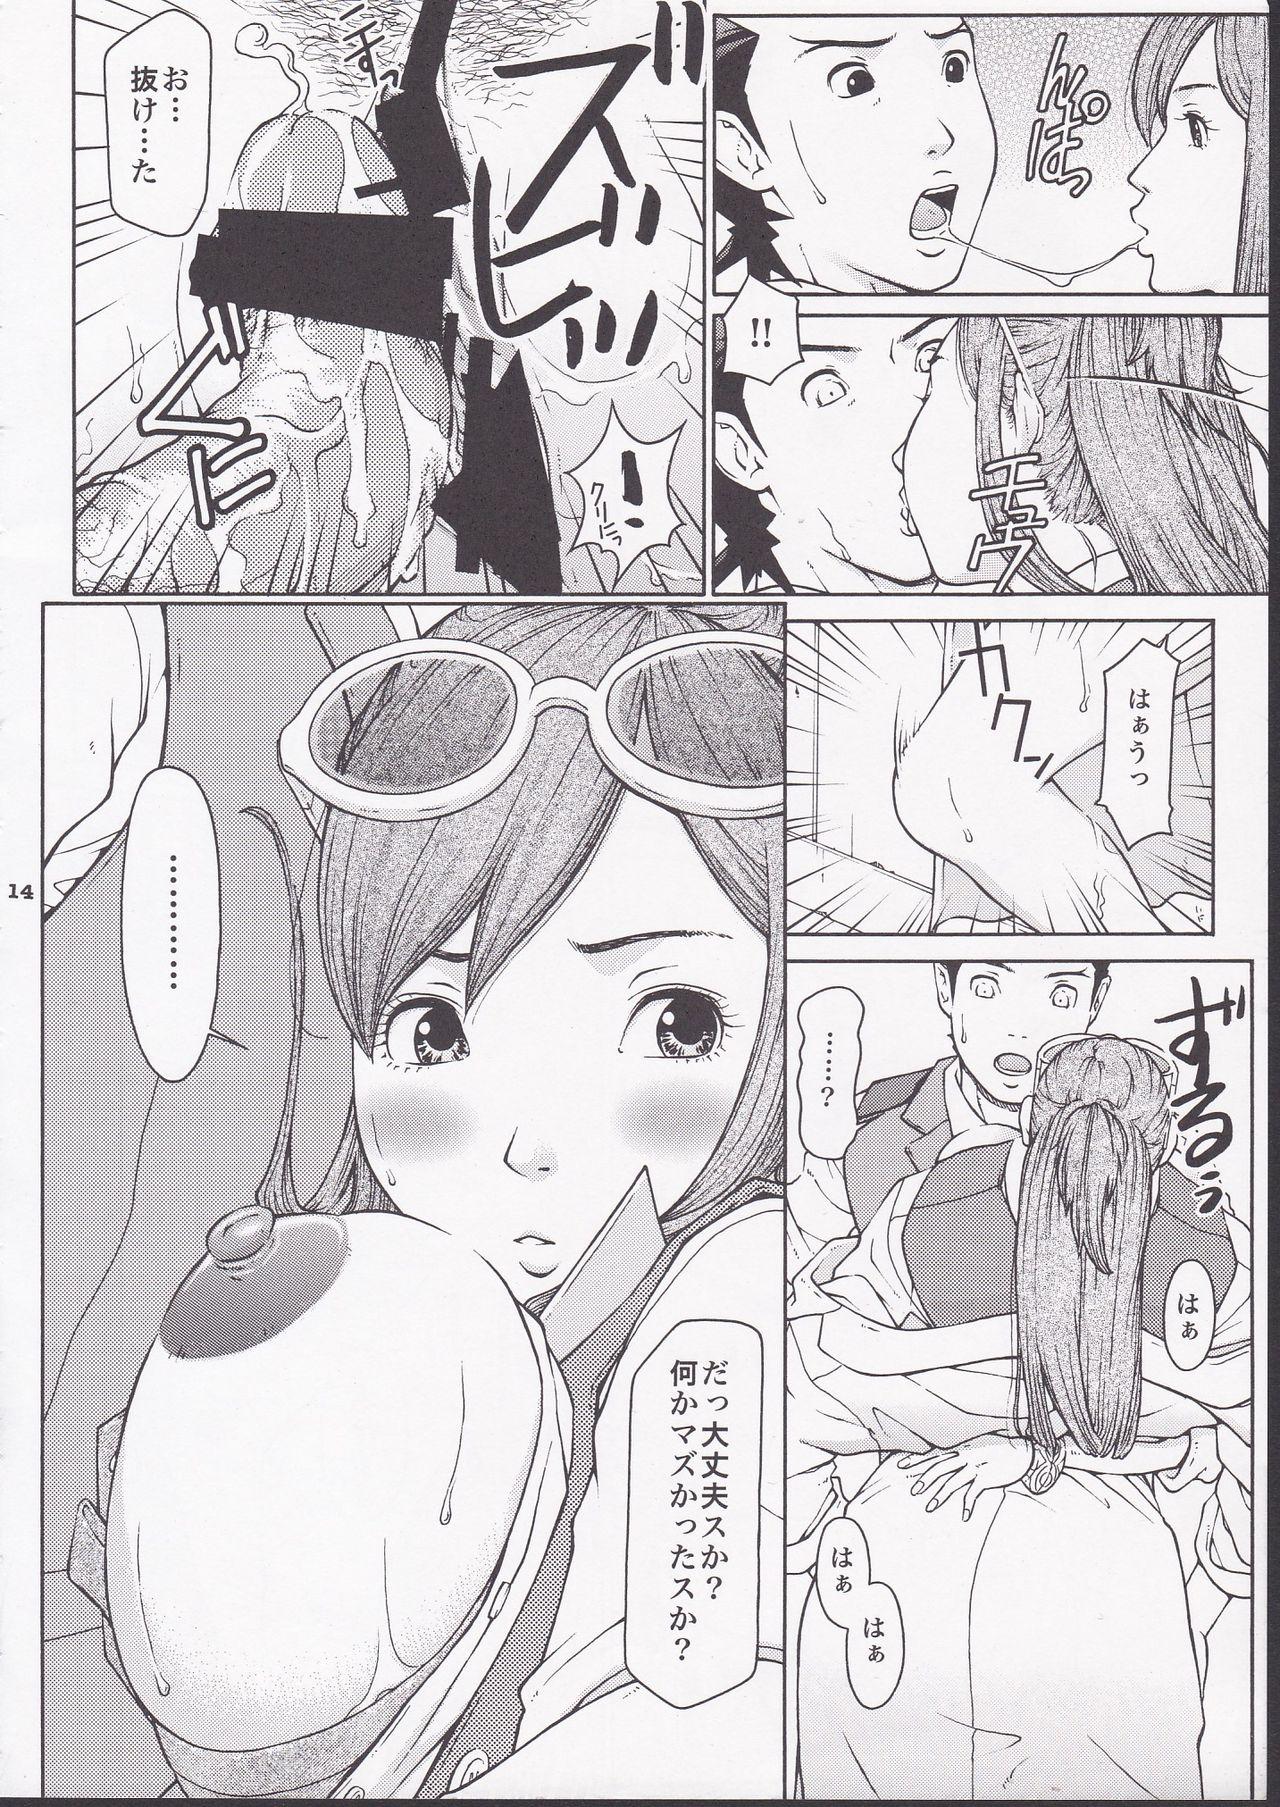 Swing TWT 6 - Ace attorney Couple Fucking - Page 12